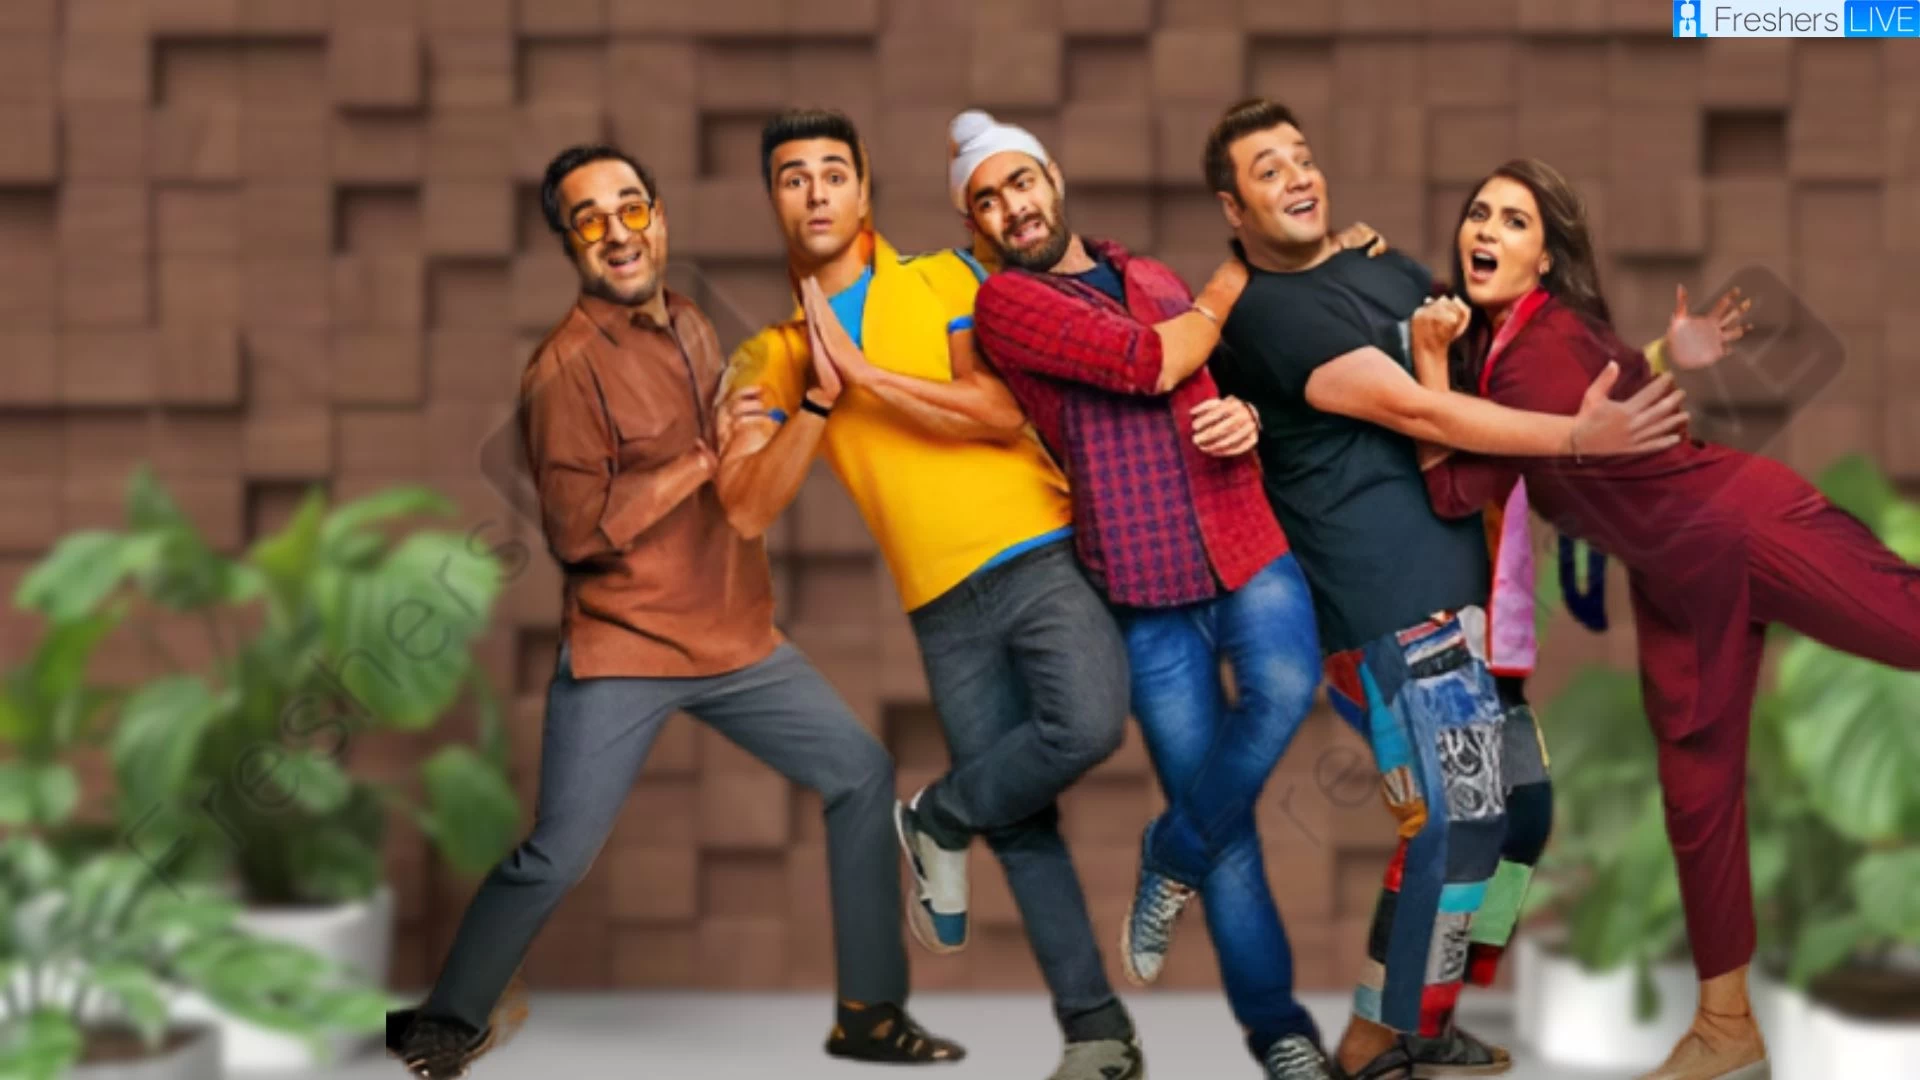 Fukrey 3 OTT Release Date and Time Confirmed 2023: When is the 2023 Fukrey 3 Movie Coming out on OTT Amazon Prime Video?